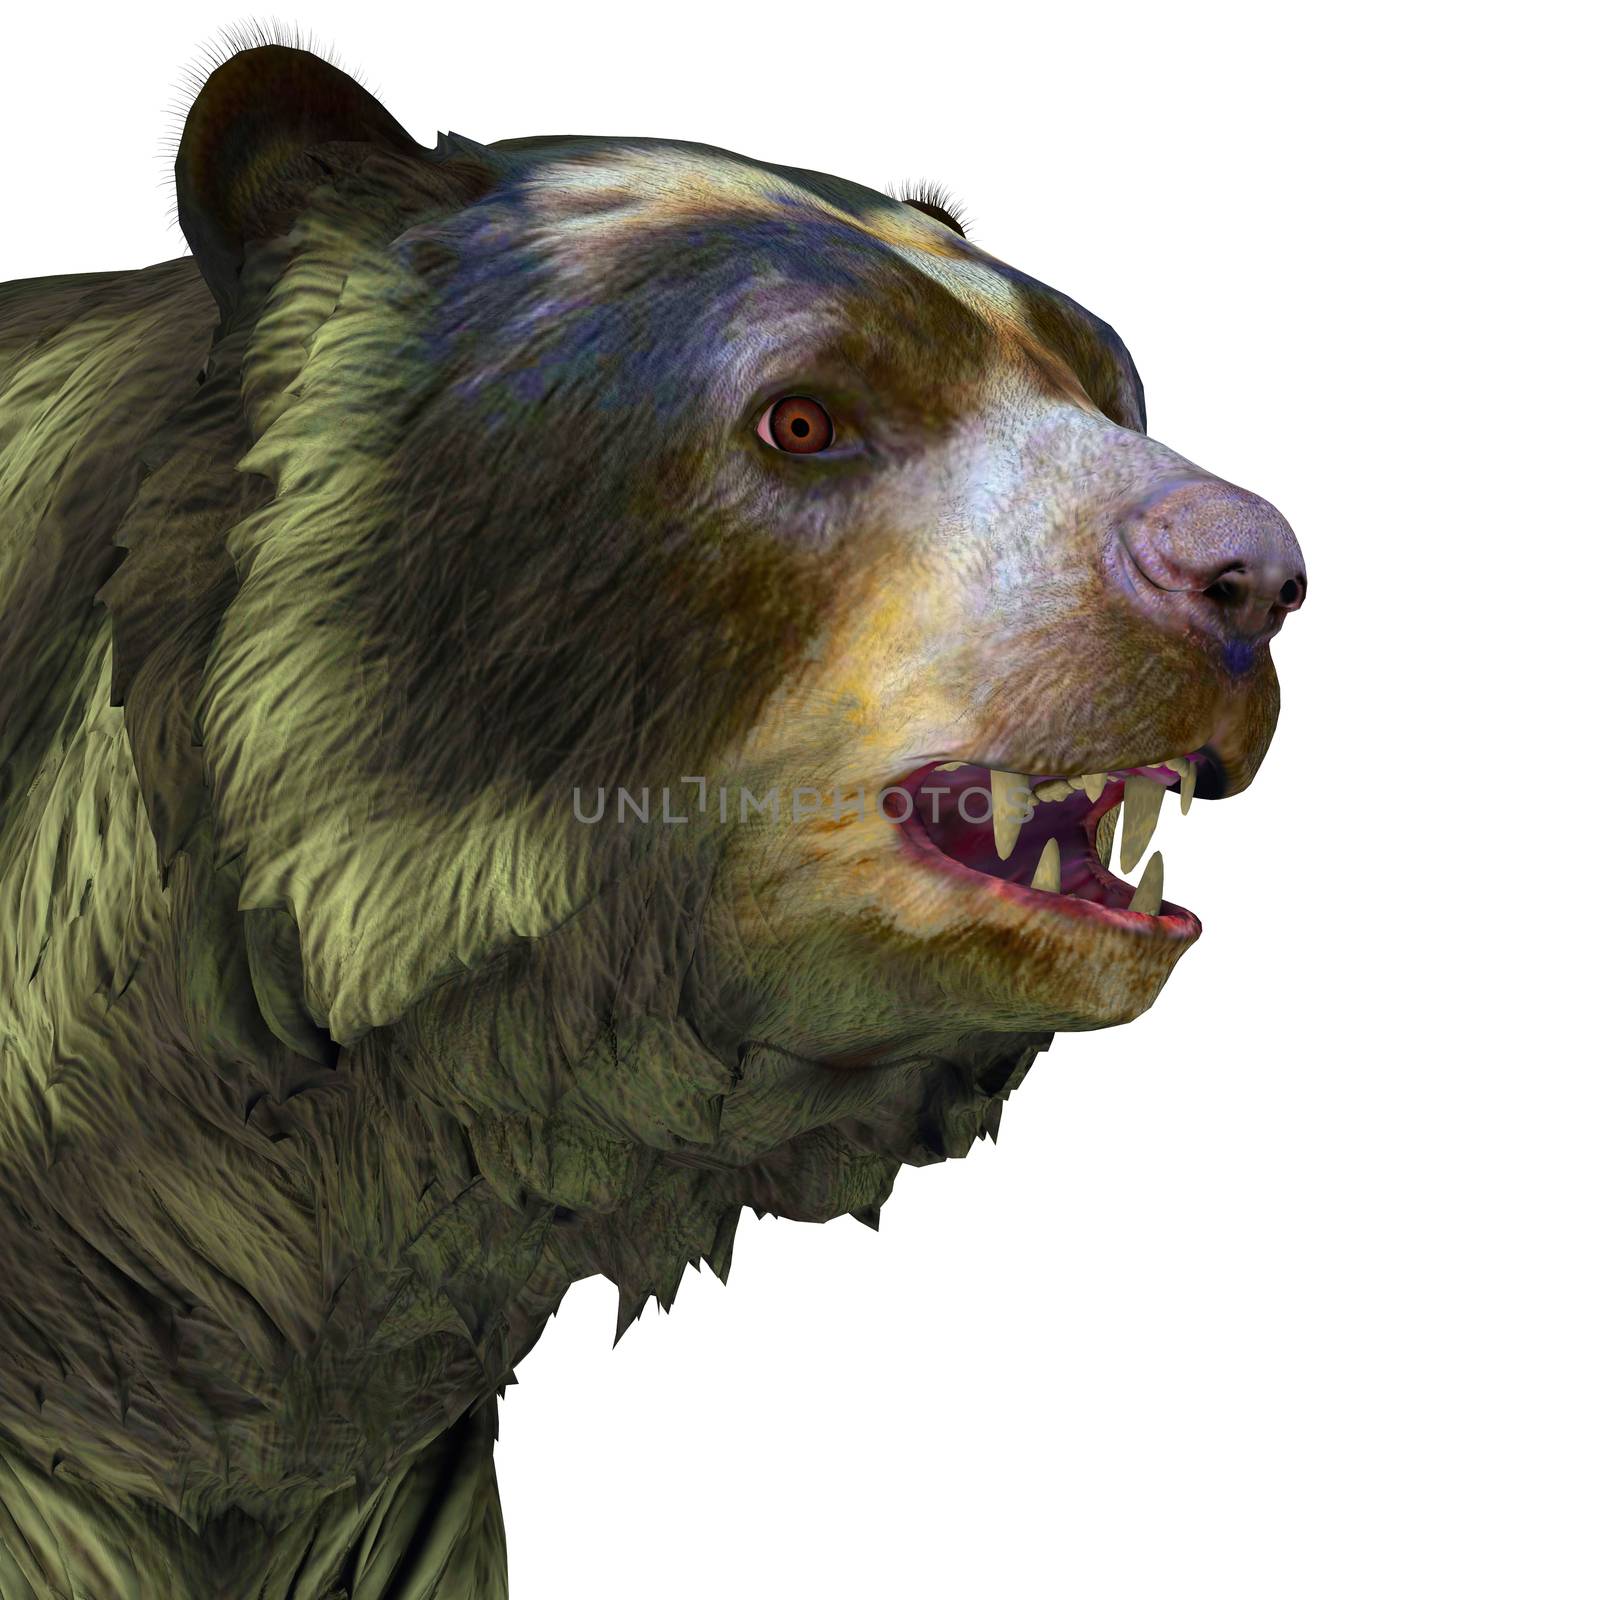 Arctodus or Short-faced Bear is an extinct mammal that lived in North America in the Pleistocene Age.